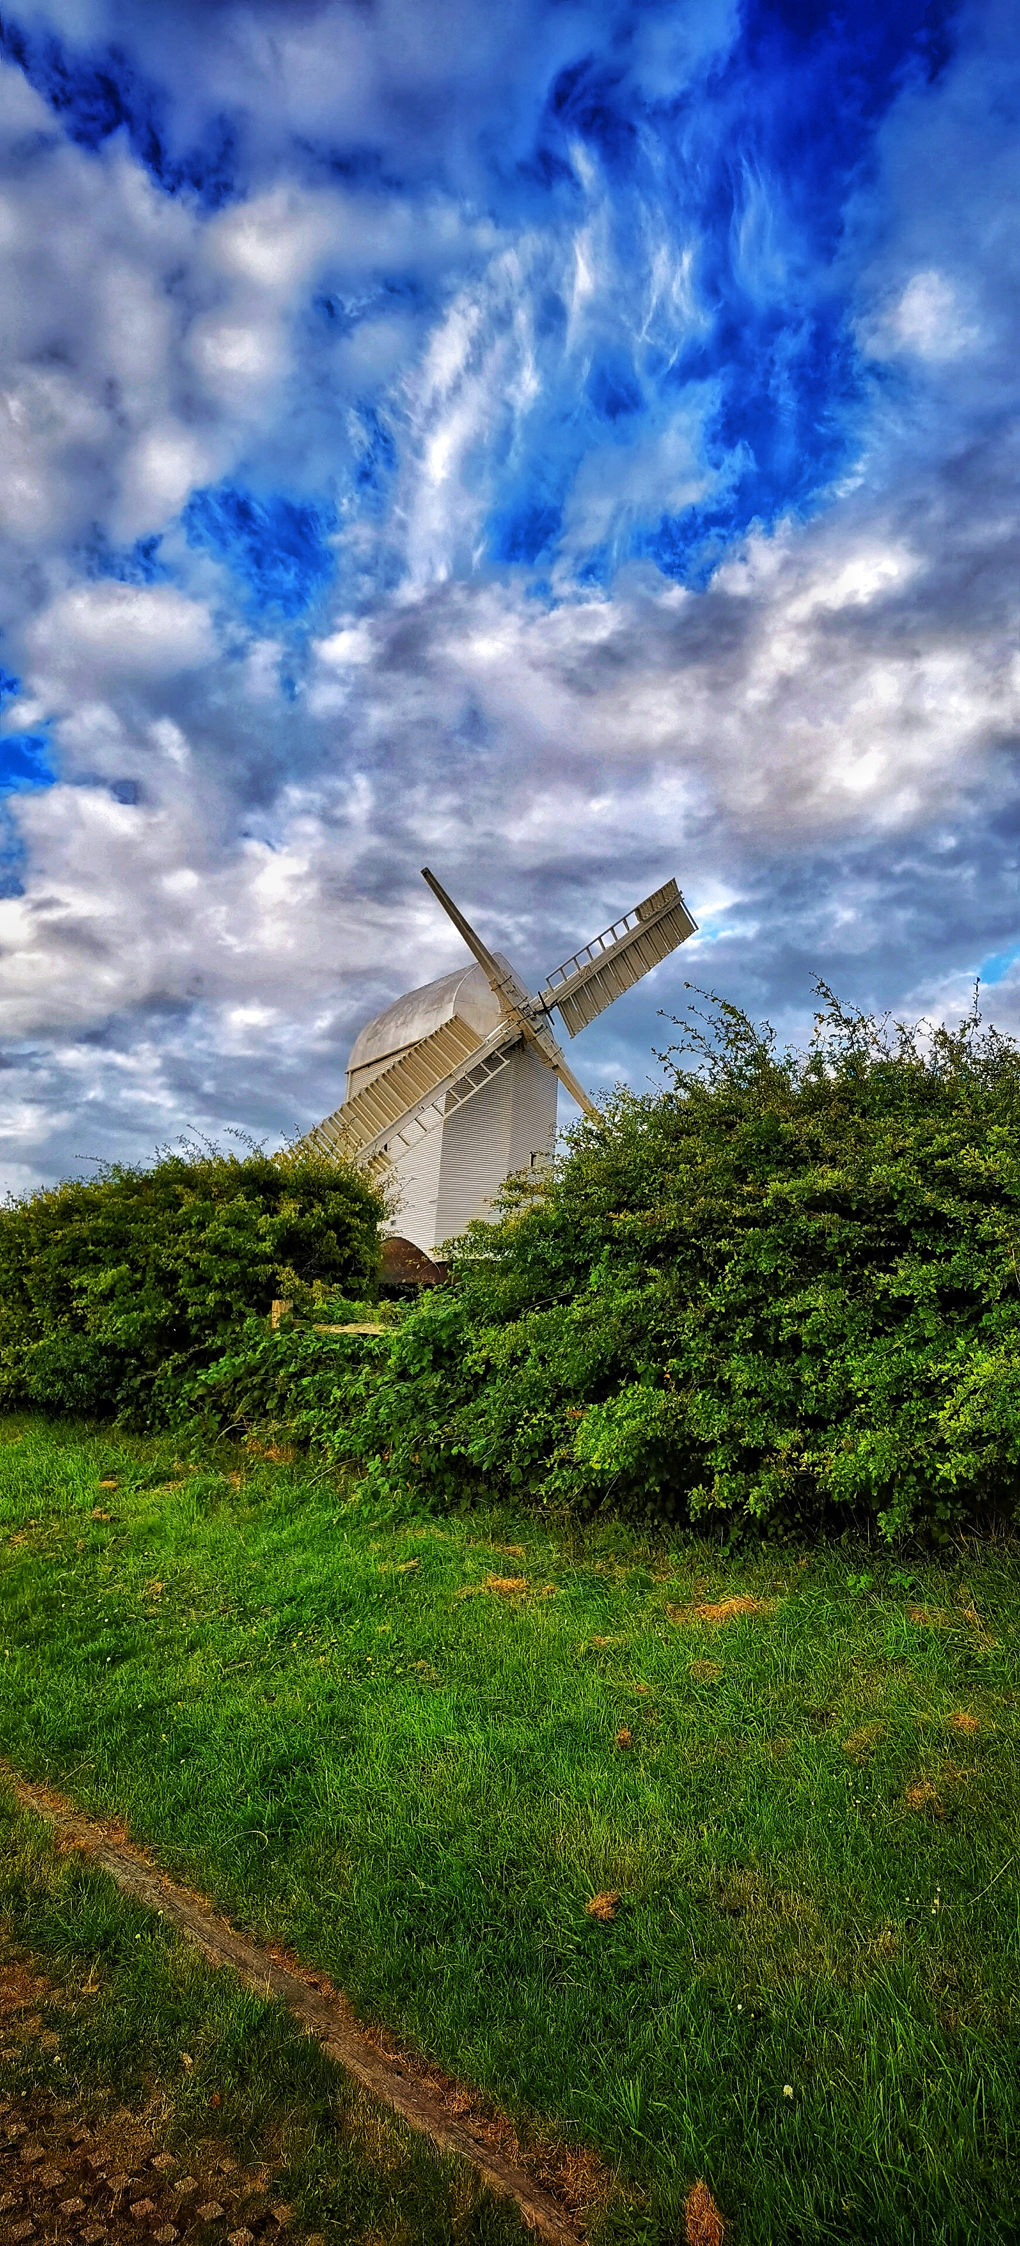 Windmill behind green hedge with blue sky and clouds